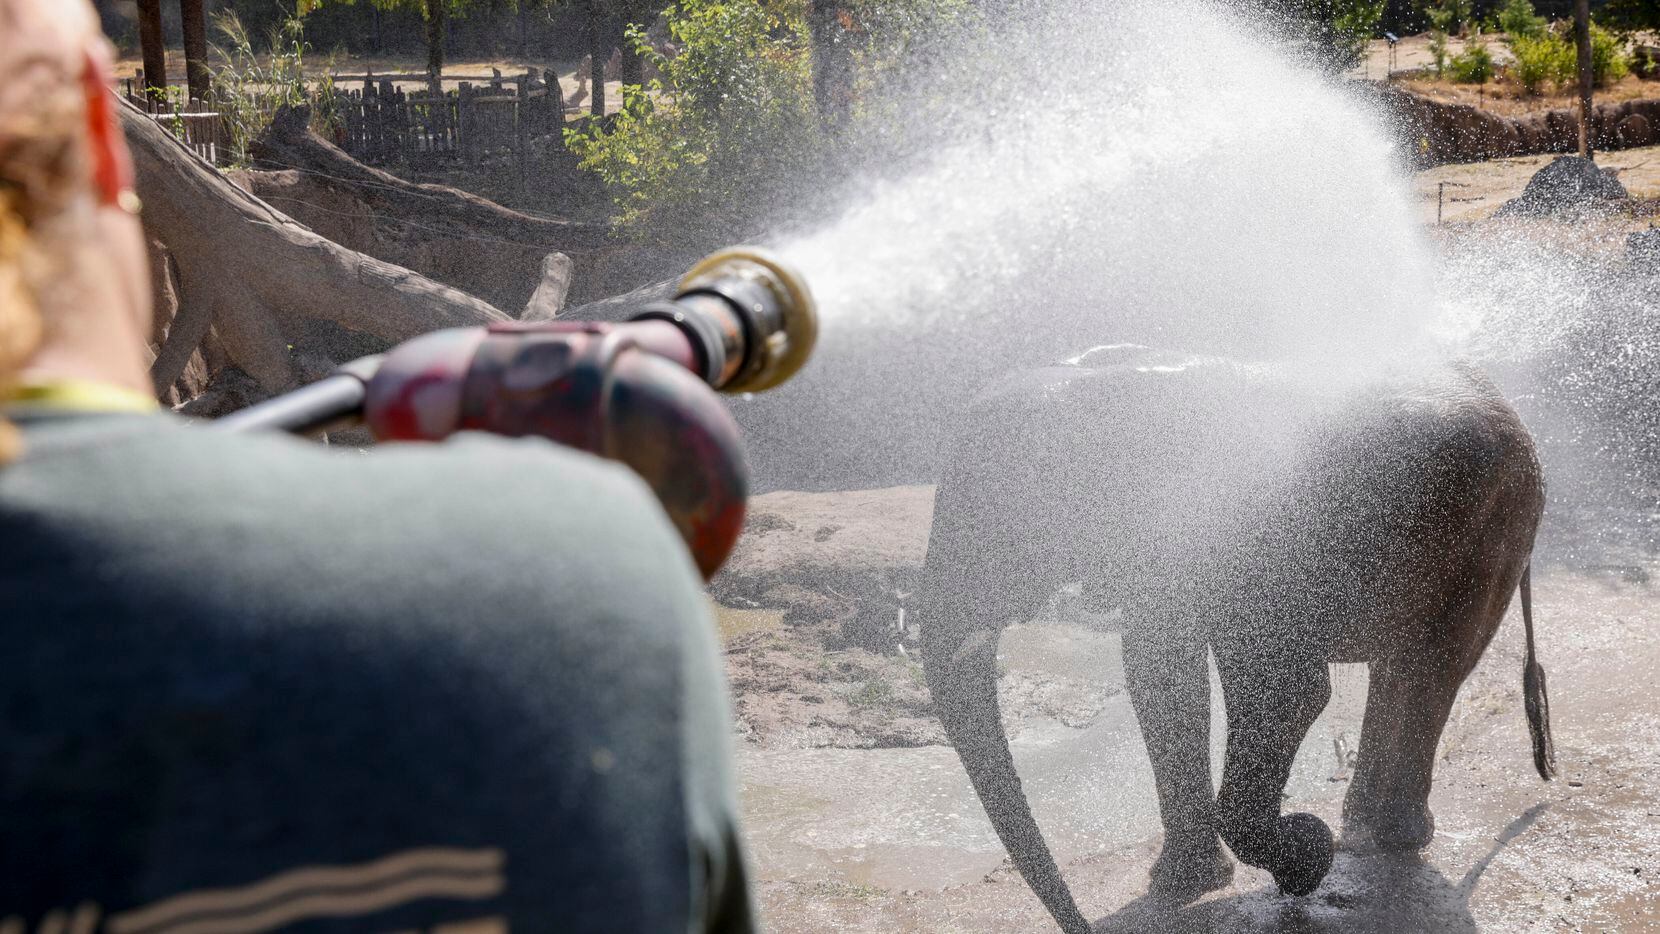 An elephant gets sprayed by a large water cannon at the Dallas Zoo.